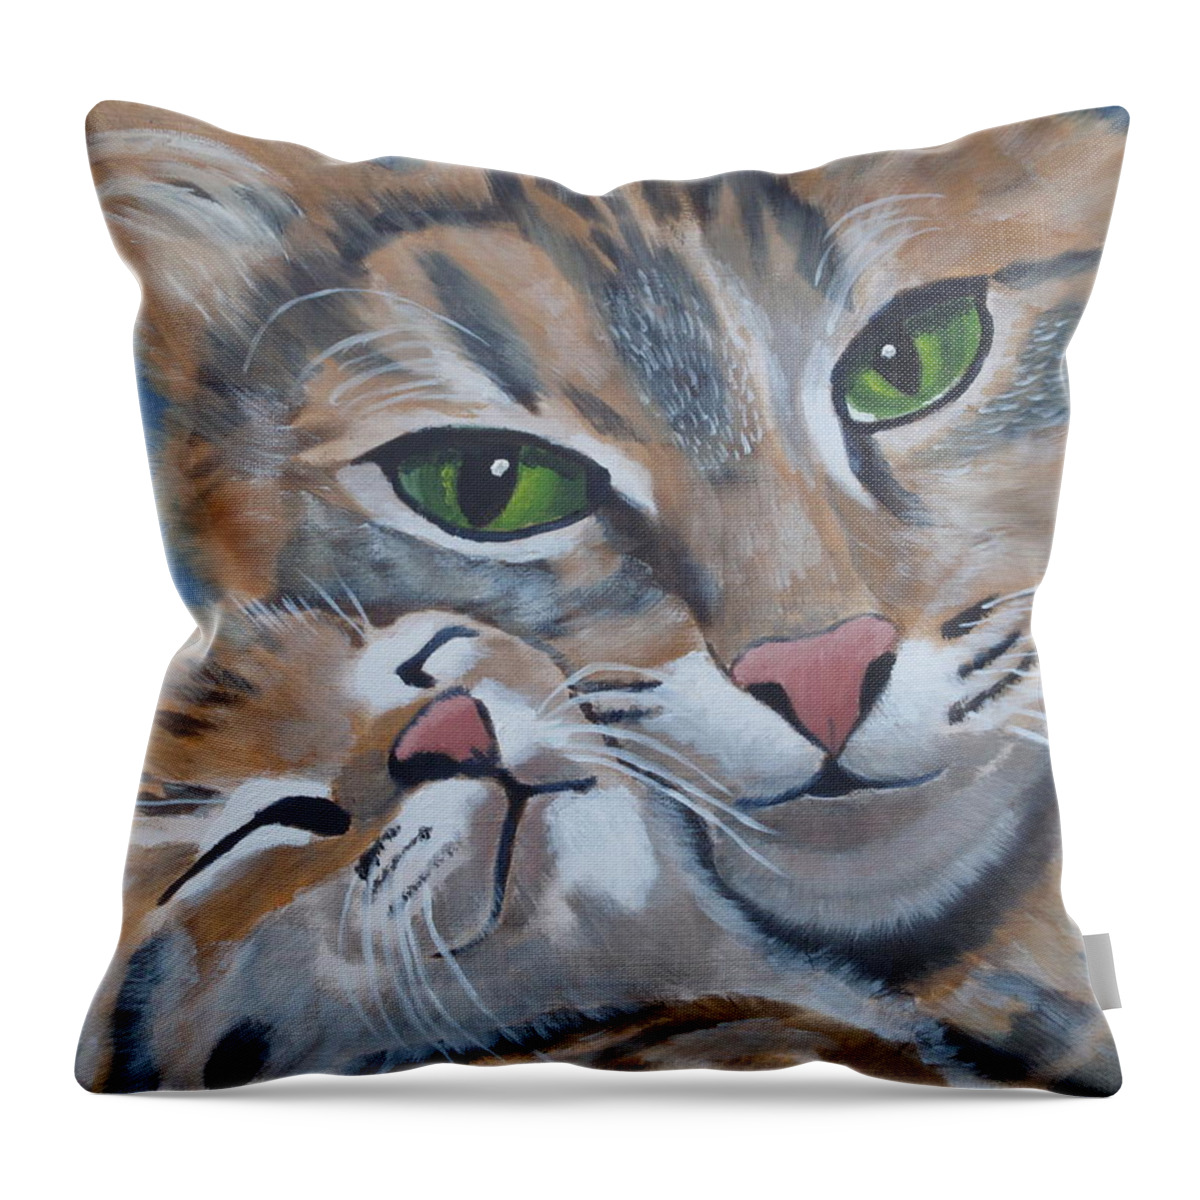 Pets Throw Pillow featuring the painting Snuggle Kitties by Kathie Camara